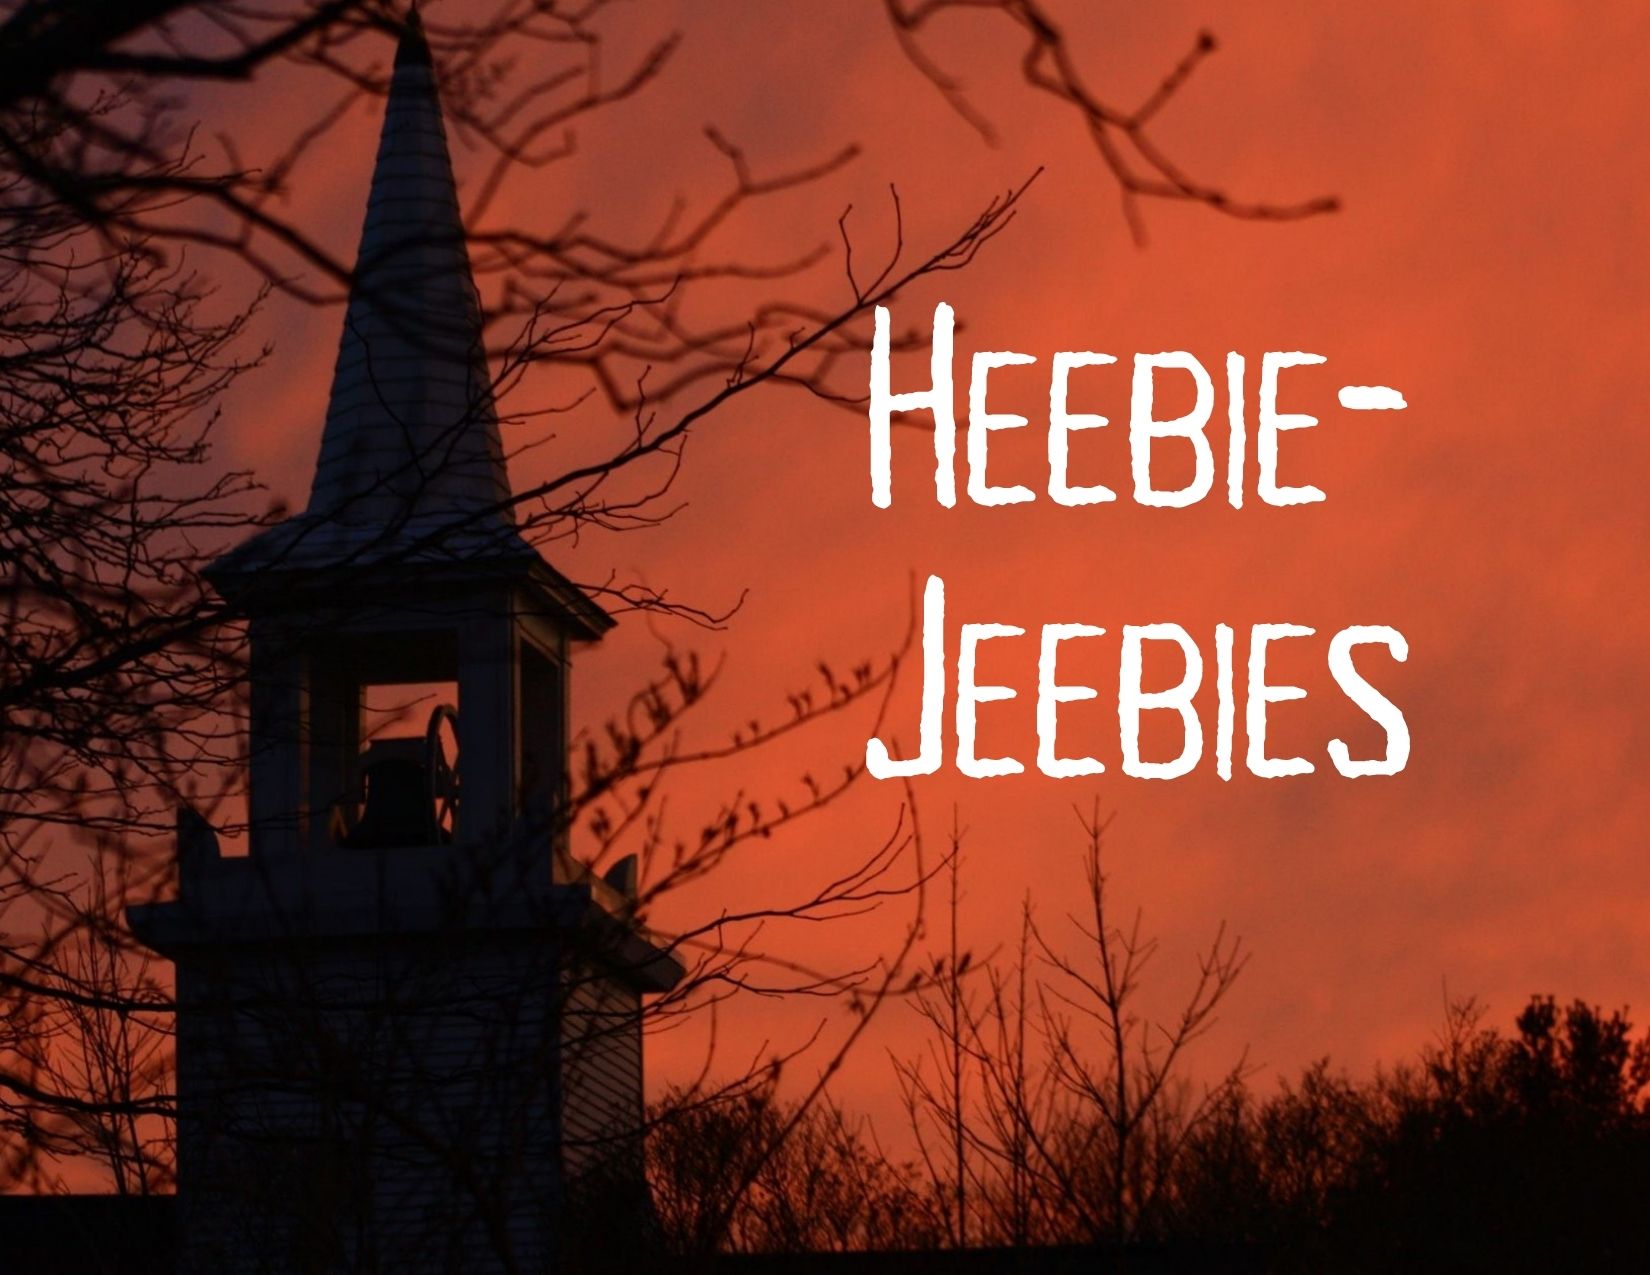 A picture of a spooky background with the words "Heebie-Jeebies"